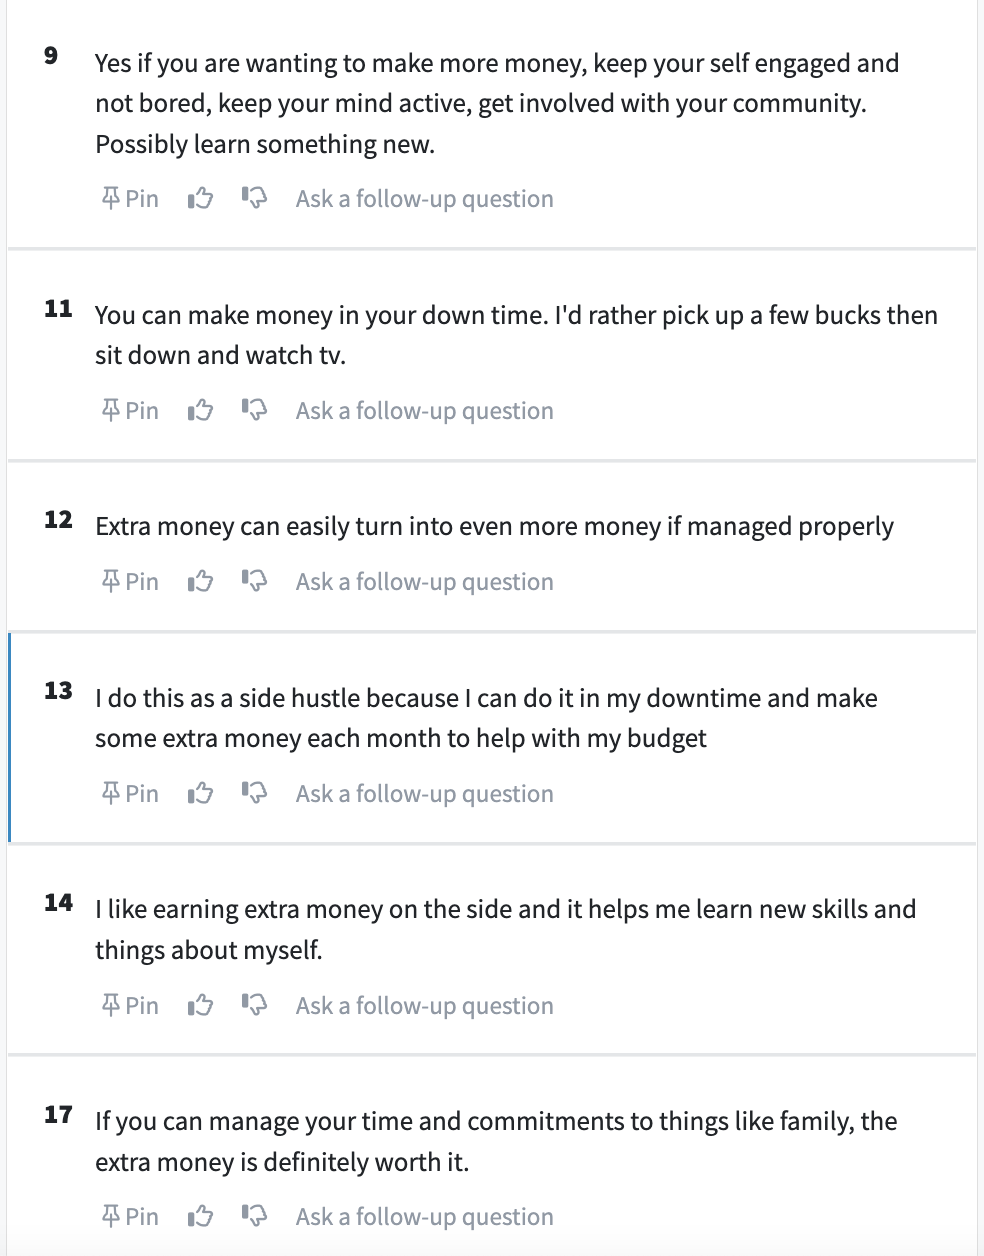 Screenshot of poll comments about side hustles